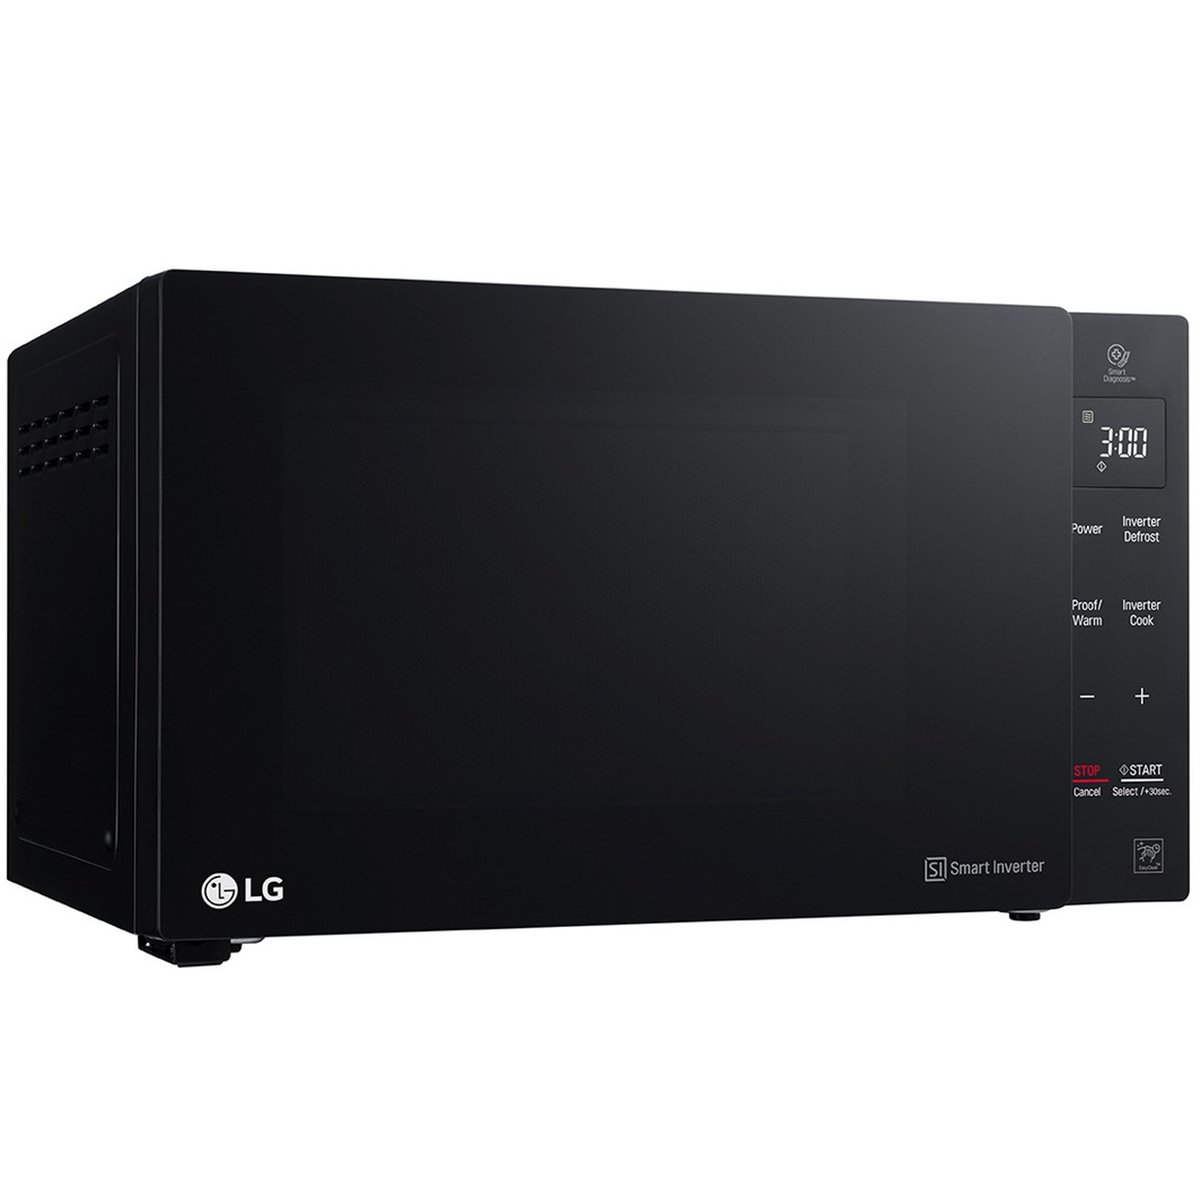 LG Microwave Oven MS2535GIS 25Ltr